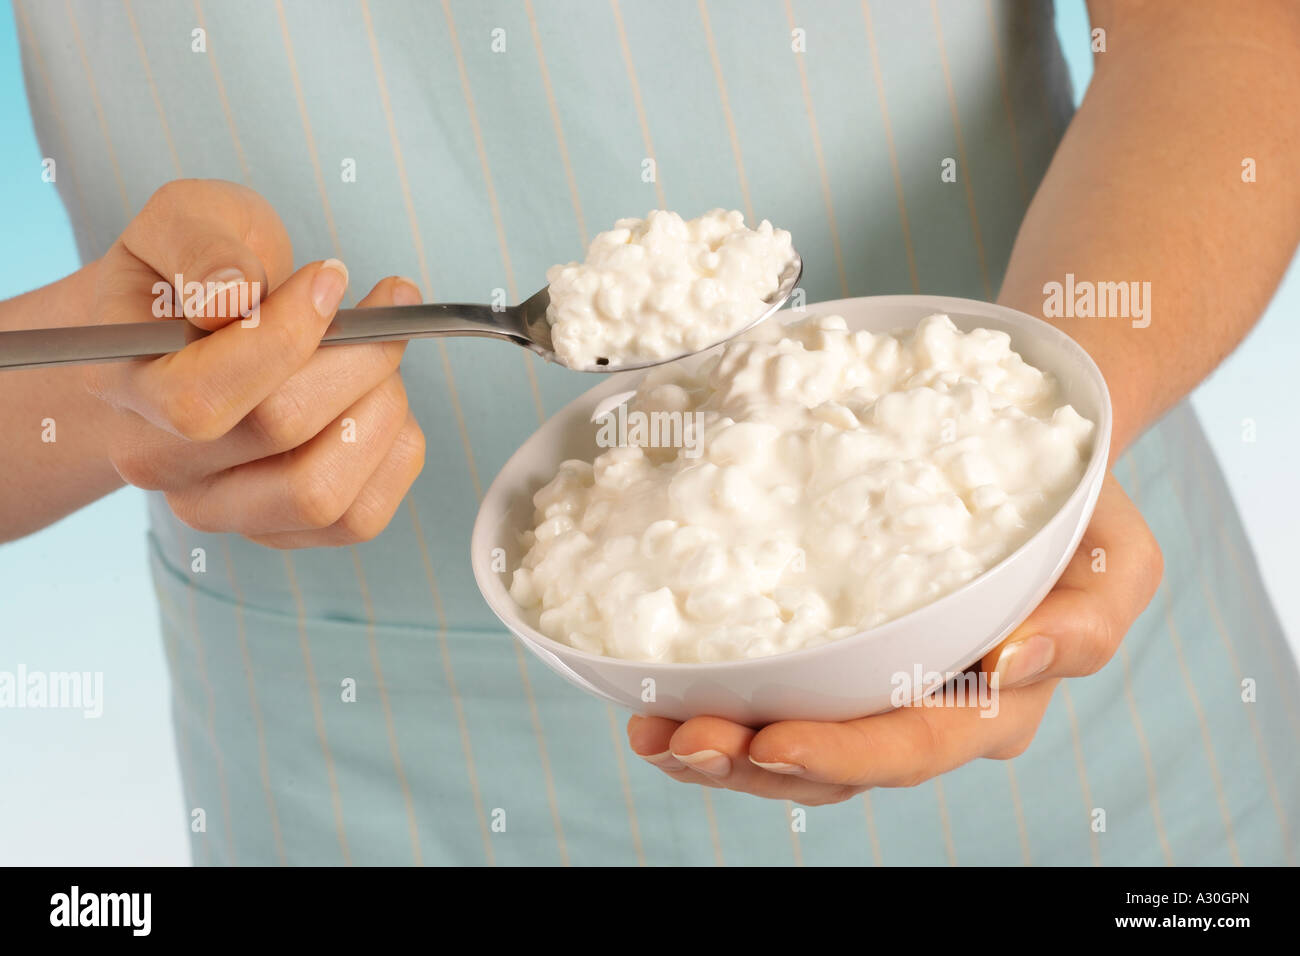 Woman Eating Cottage Cheese Stock Photo 10630412 Alamy